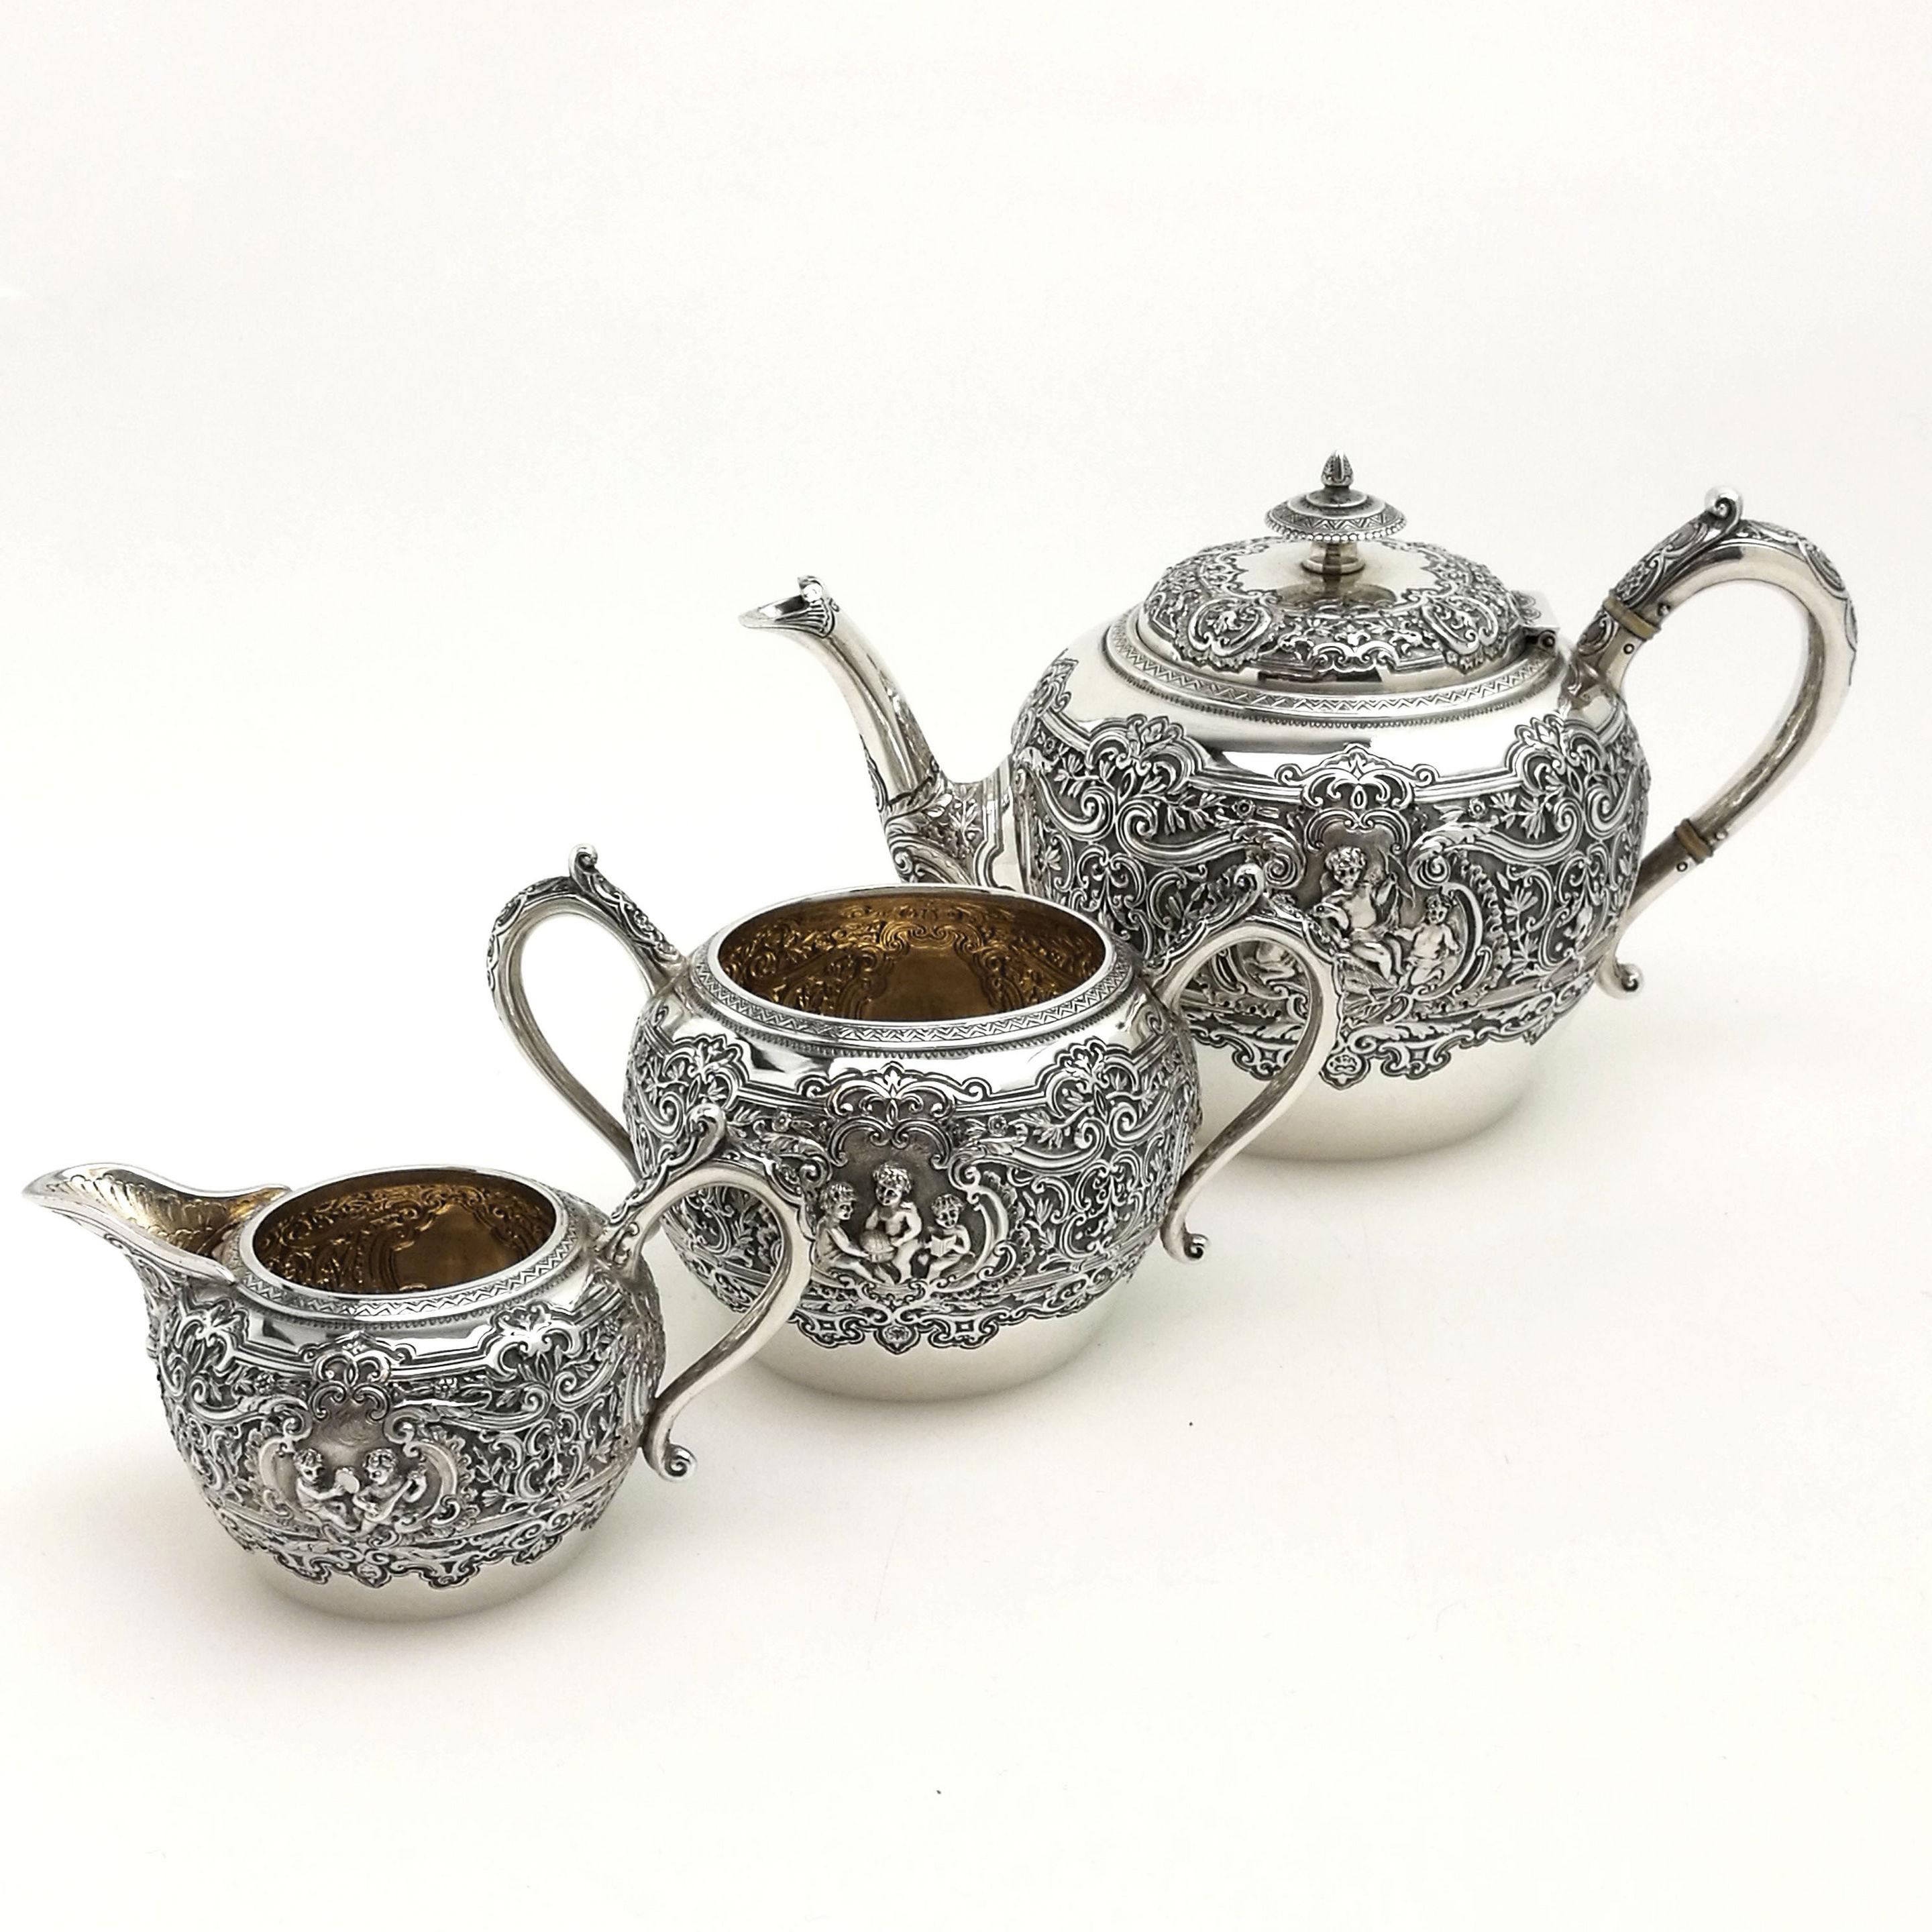 A lovely Antique Victorian solid silver three-piece tea set comprising of a teapot, sugar bowl and cream jug. Each piece in this set is decorated with ornate detailed chasing including floral, foliate and scroll patterns. Each piece has a pair of